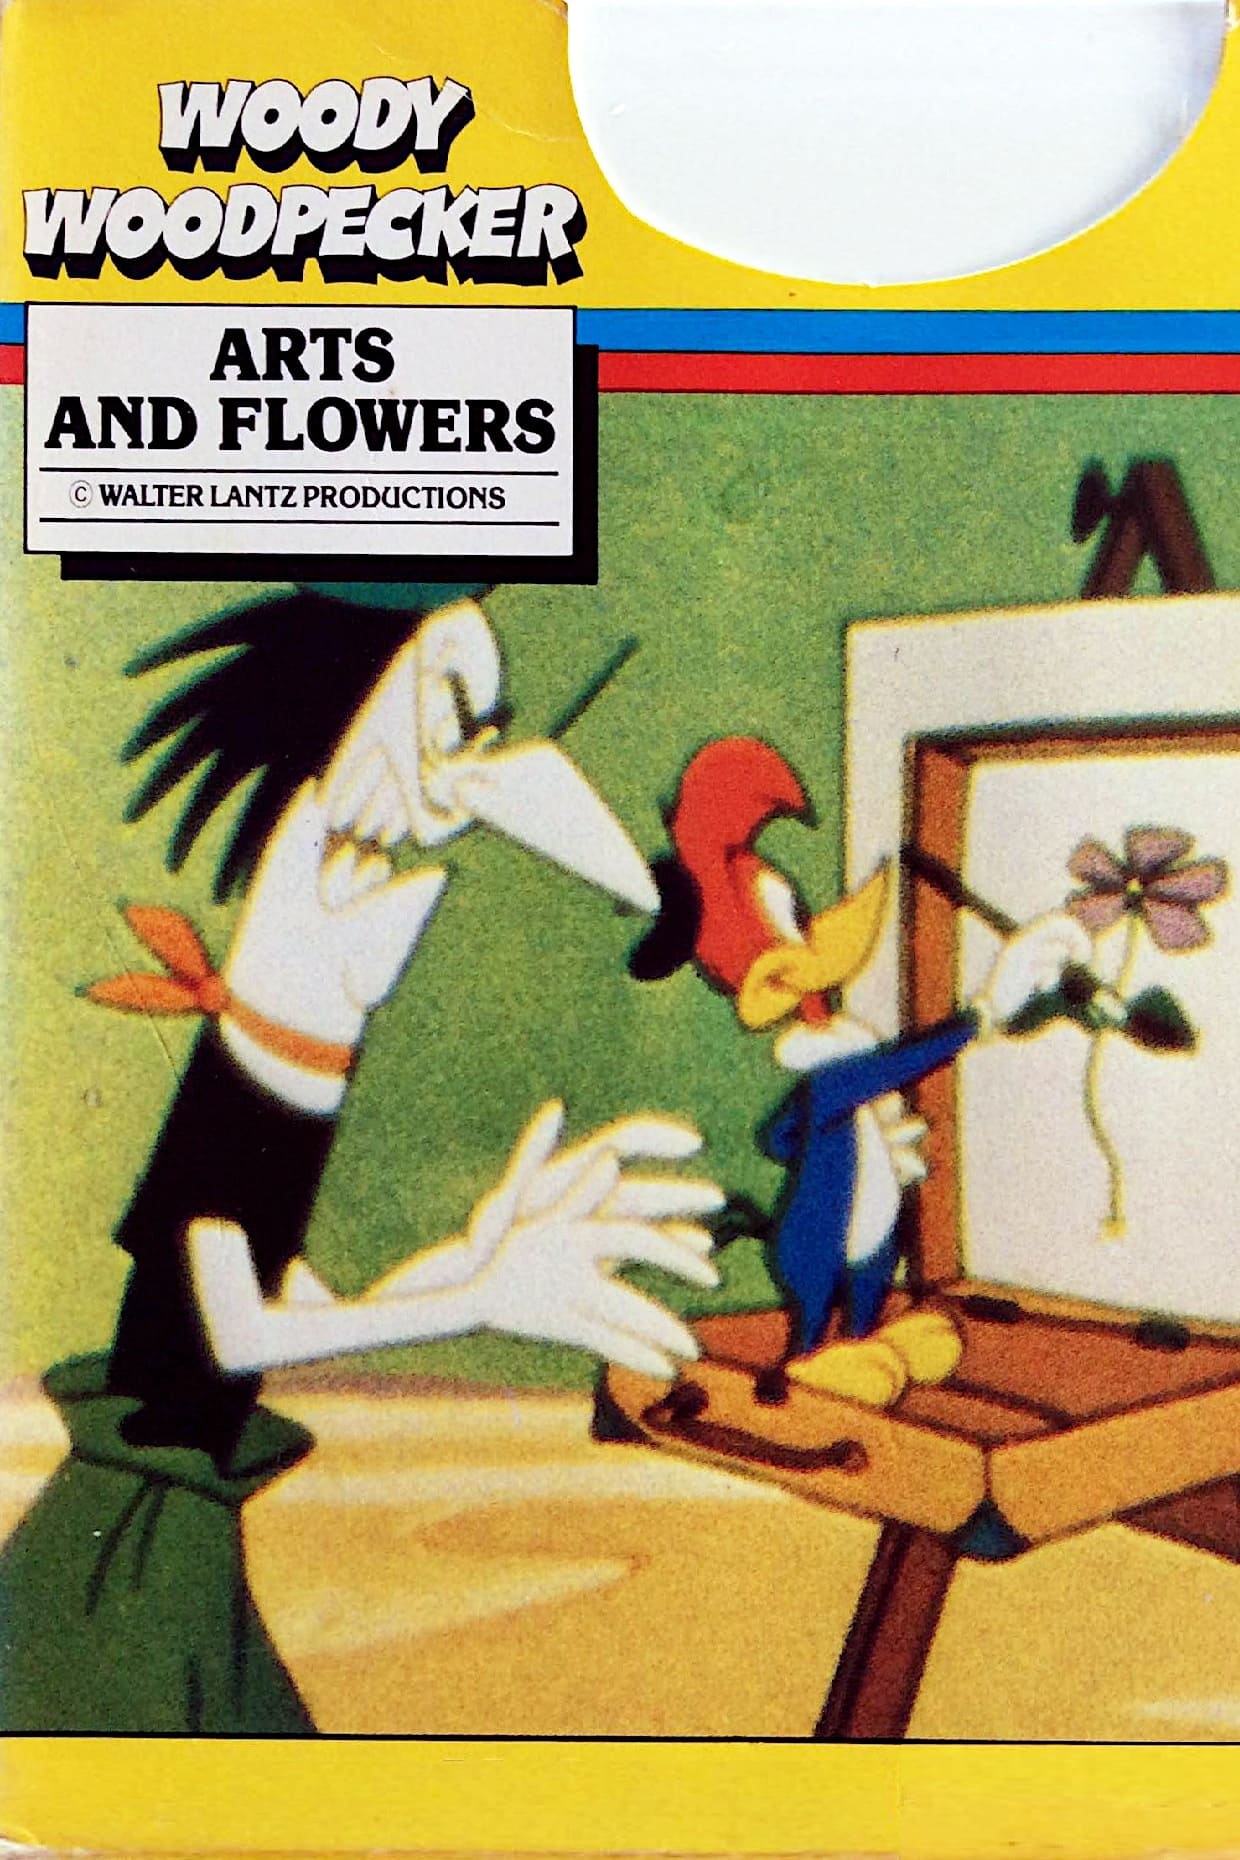 Arts and Flowers (1956)